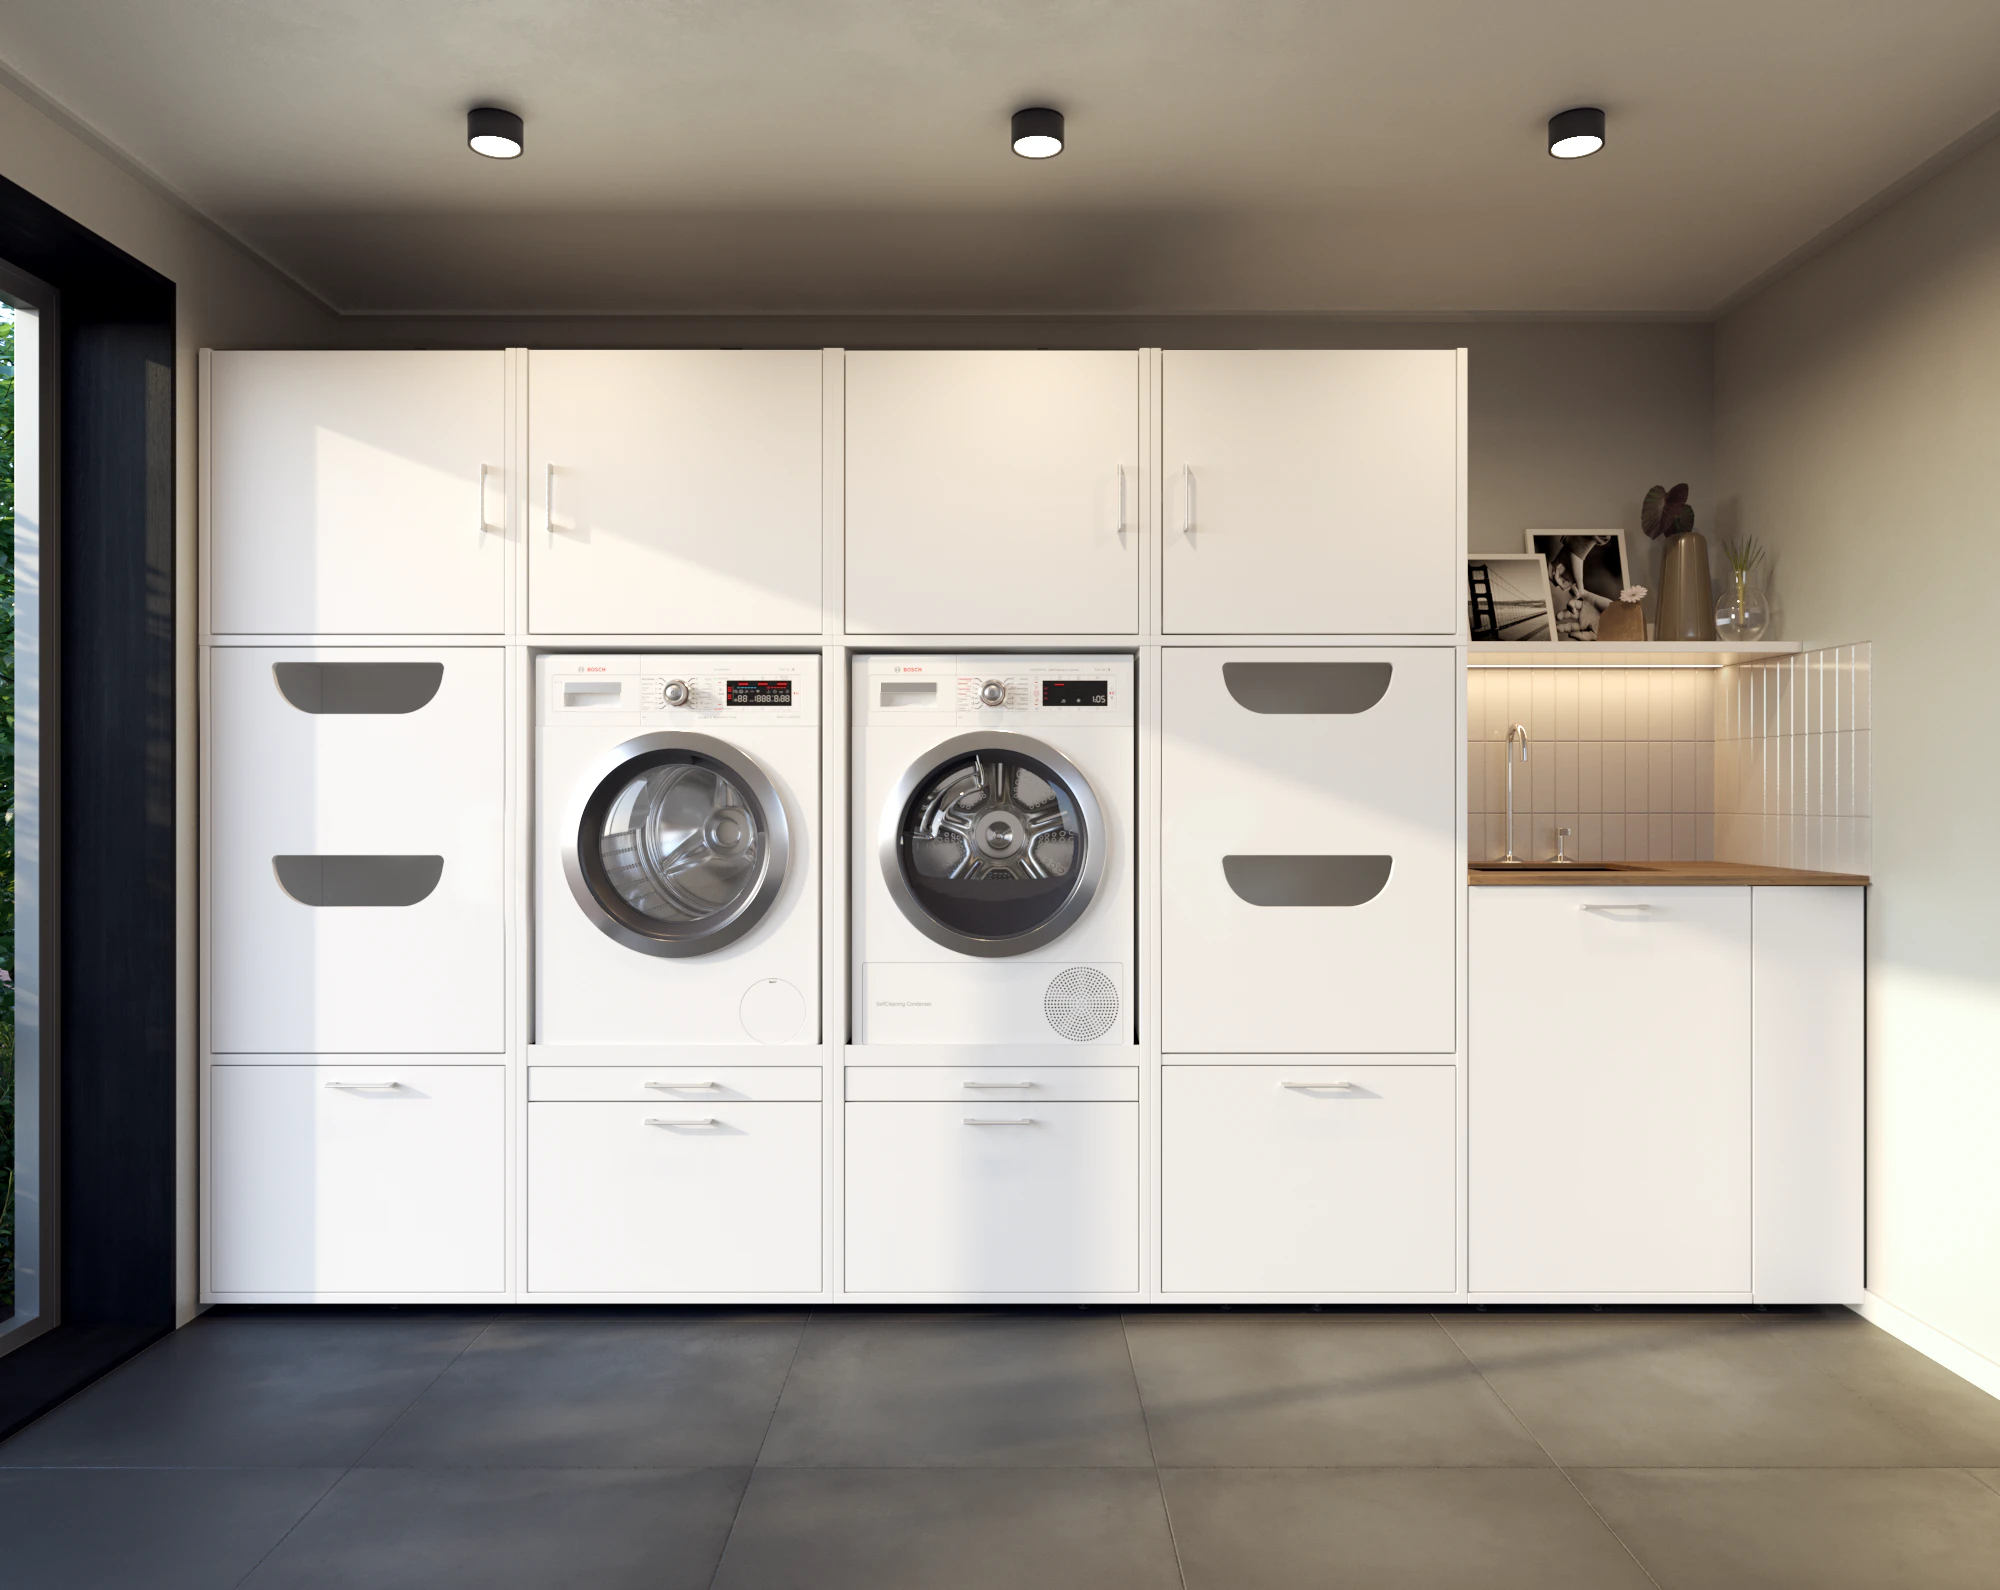 Lifestyle picture of white washing machine and dryer cupboard wall with laundry basket cabinets